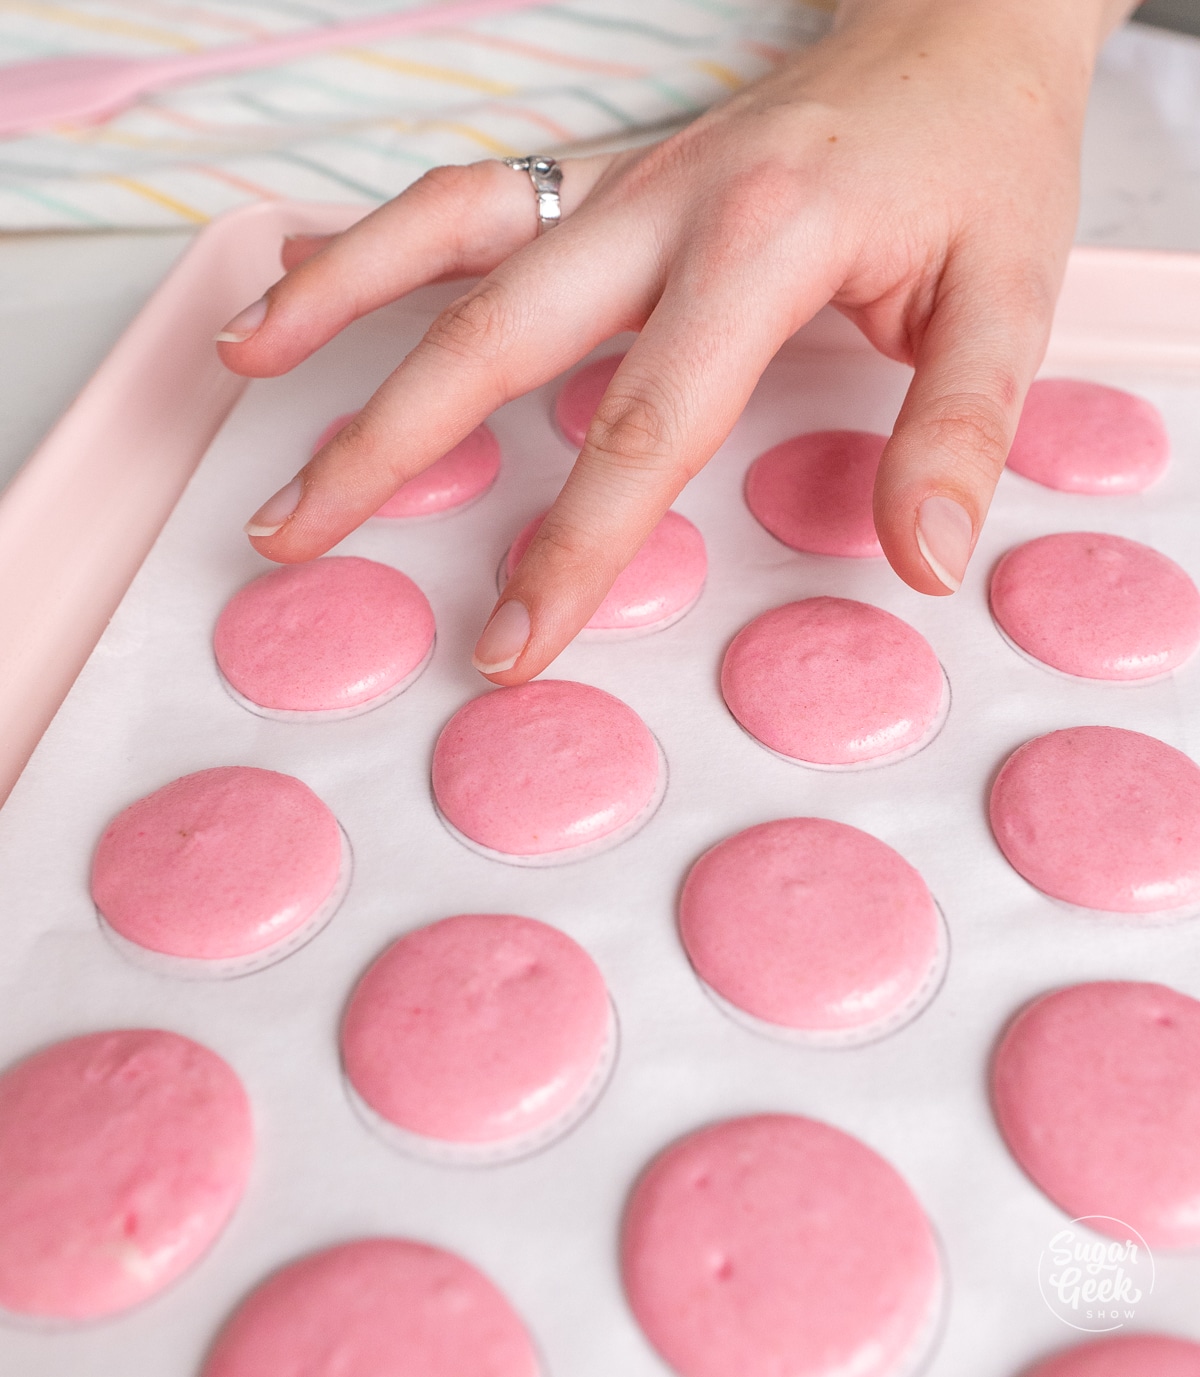 finger touching the top of a rested unbaked macaron